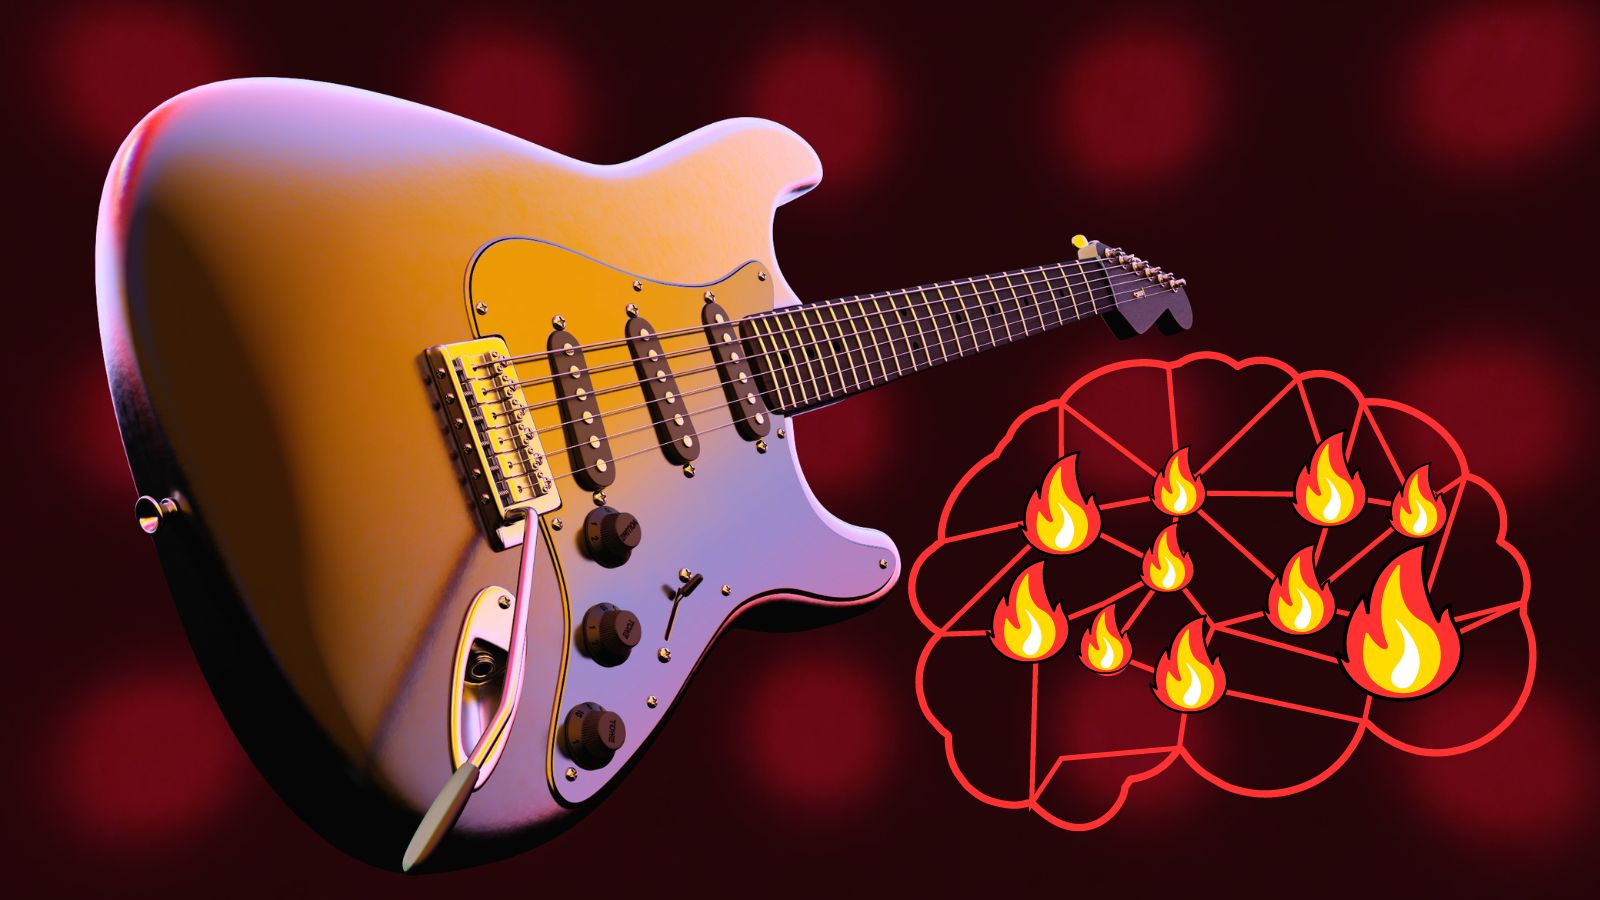 Image of guitar and a brain network on fire representing motivation